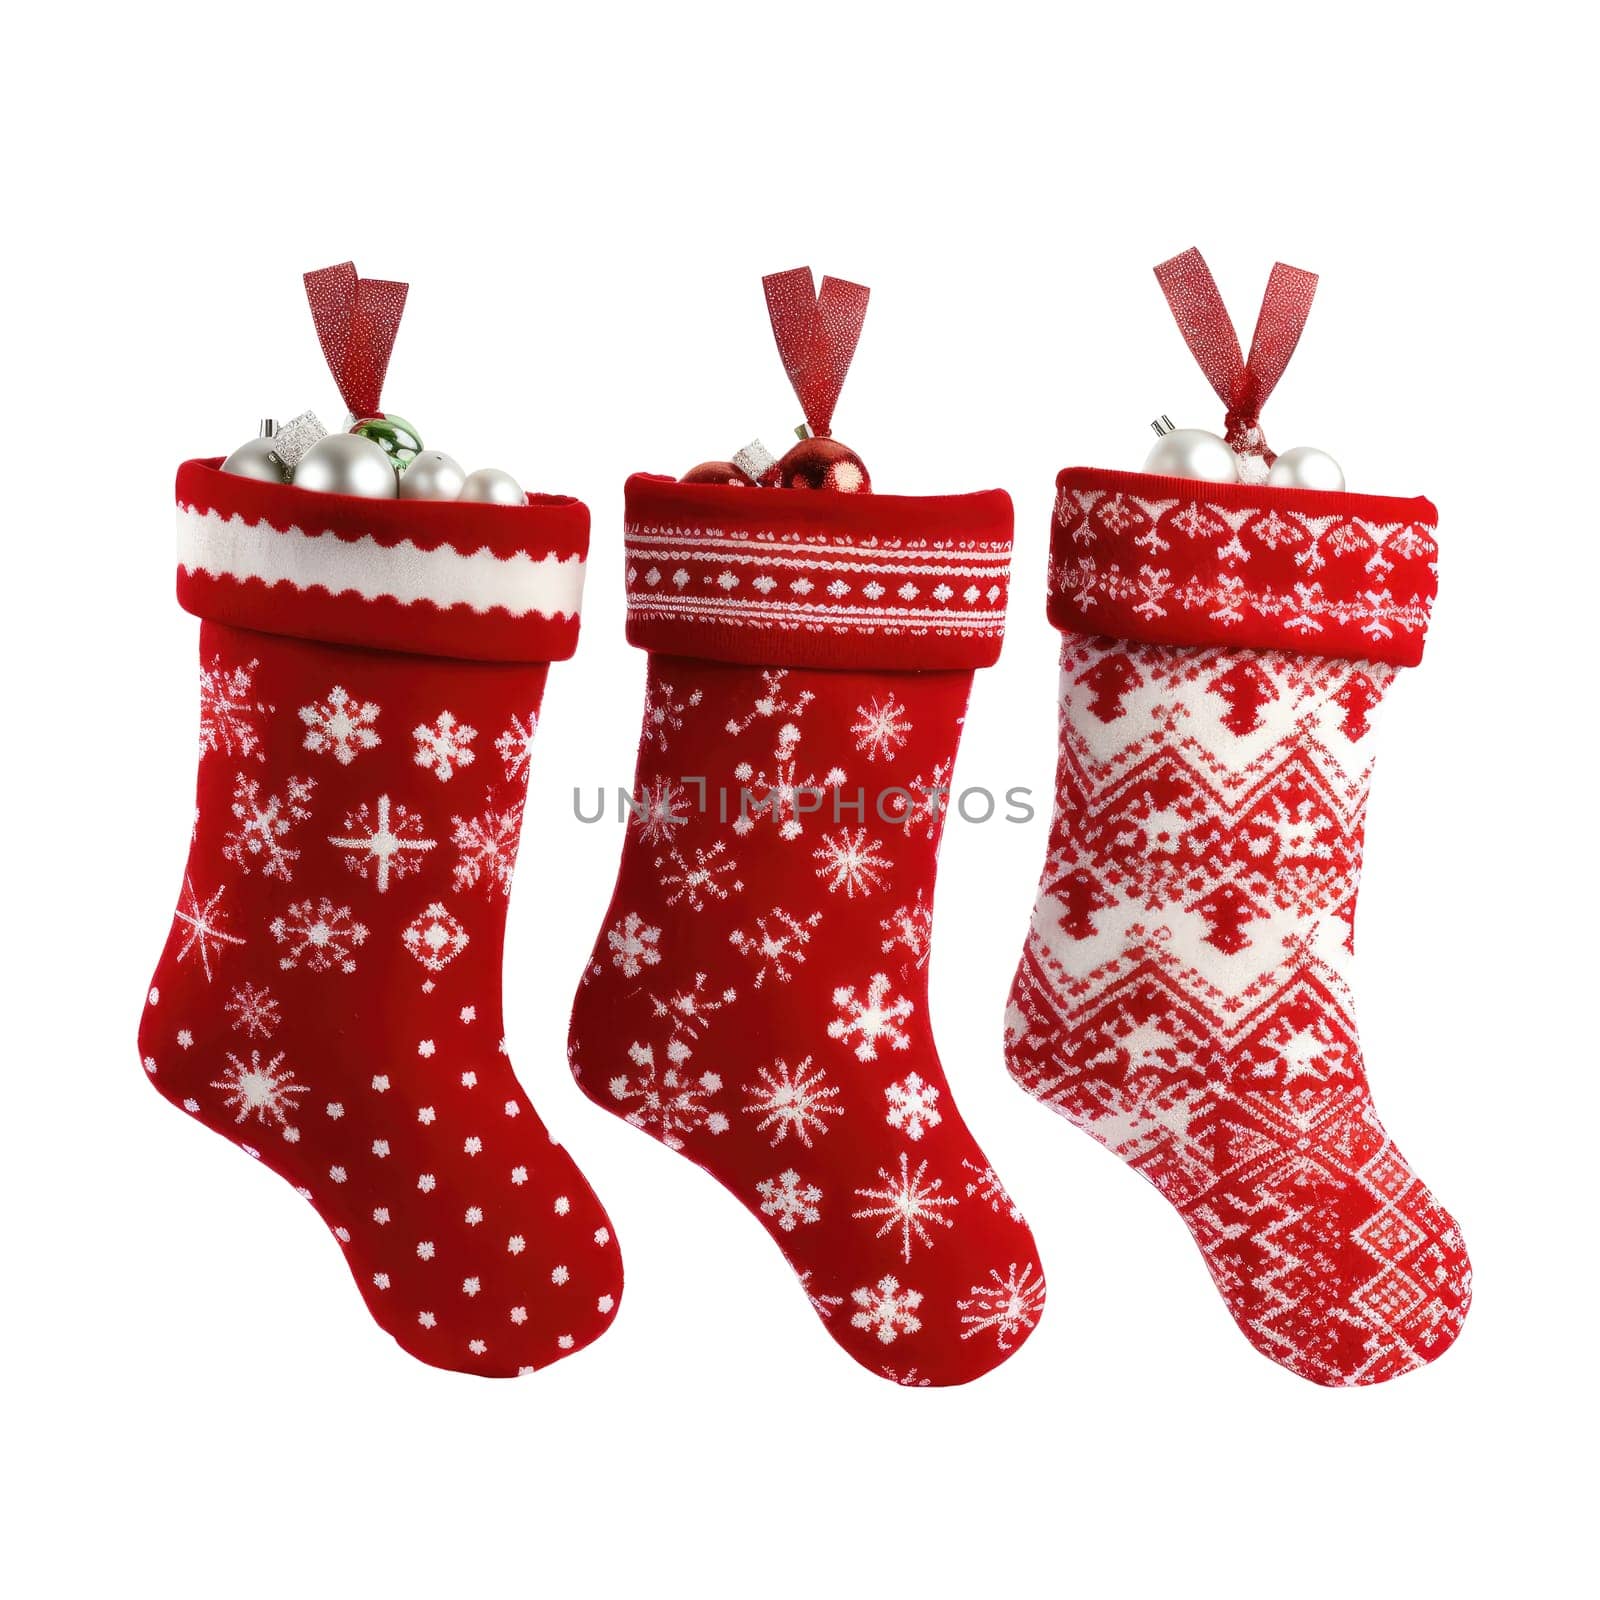 Christmas stocking isolated on white background by natali_brill